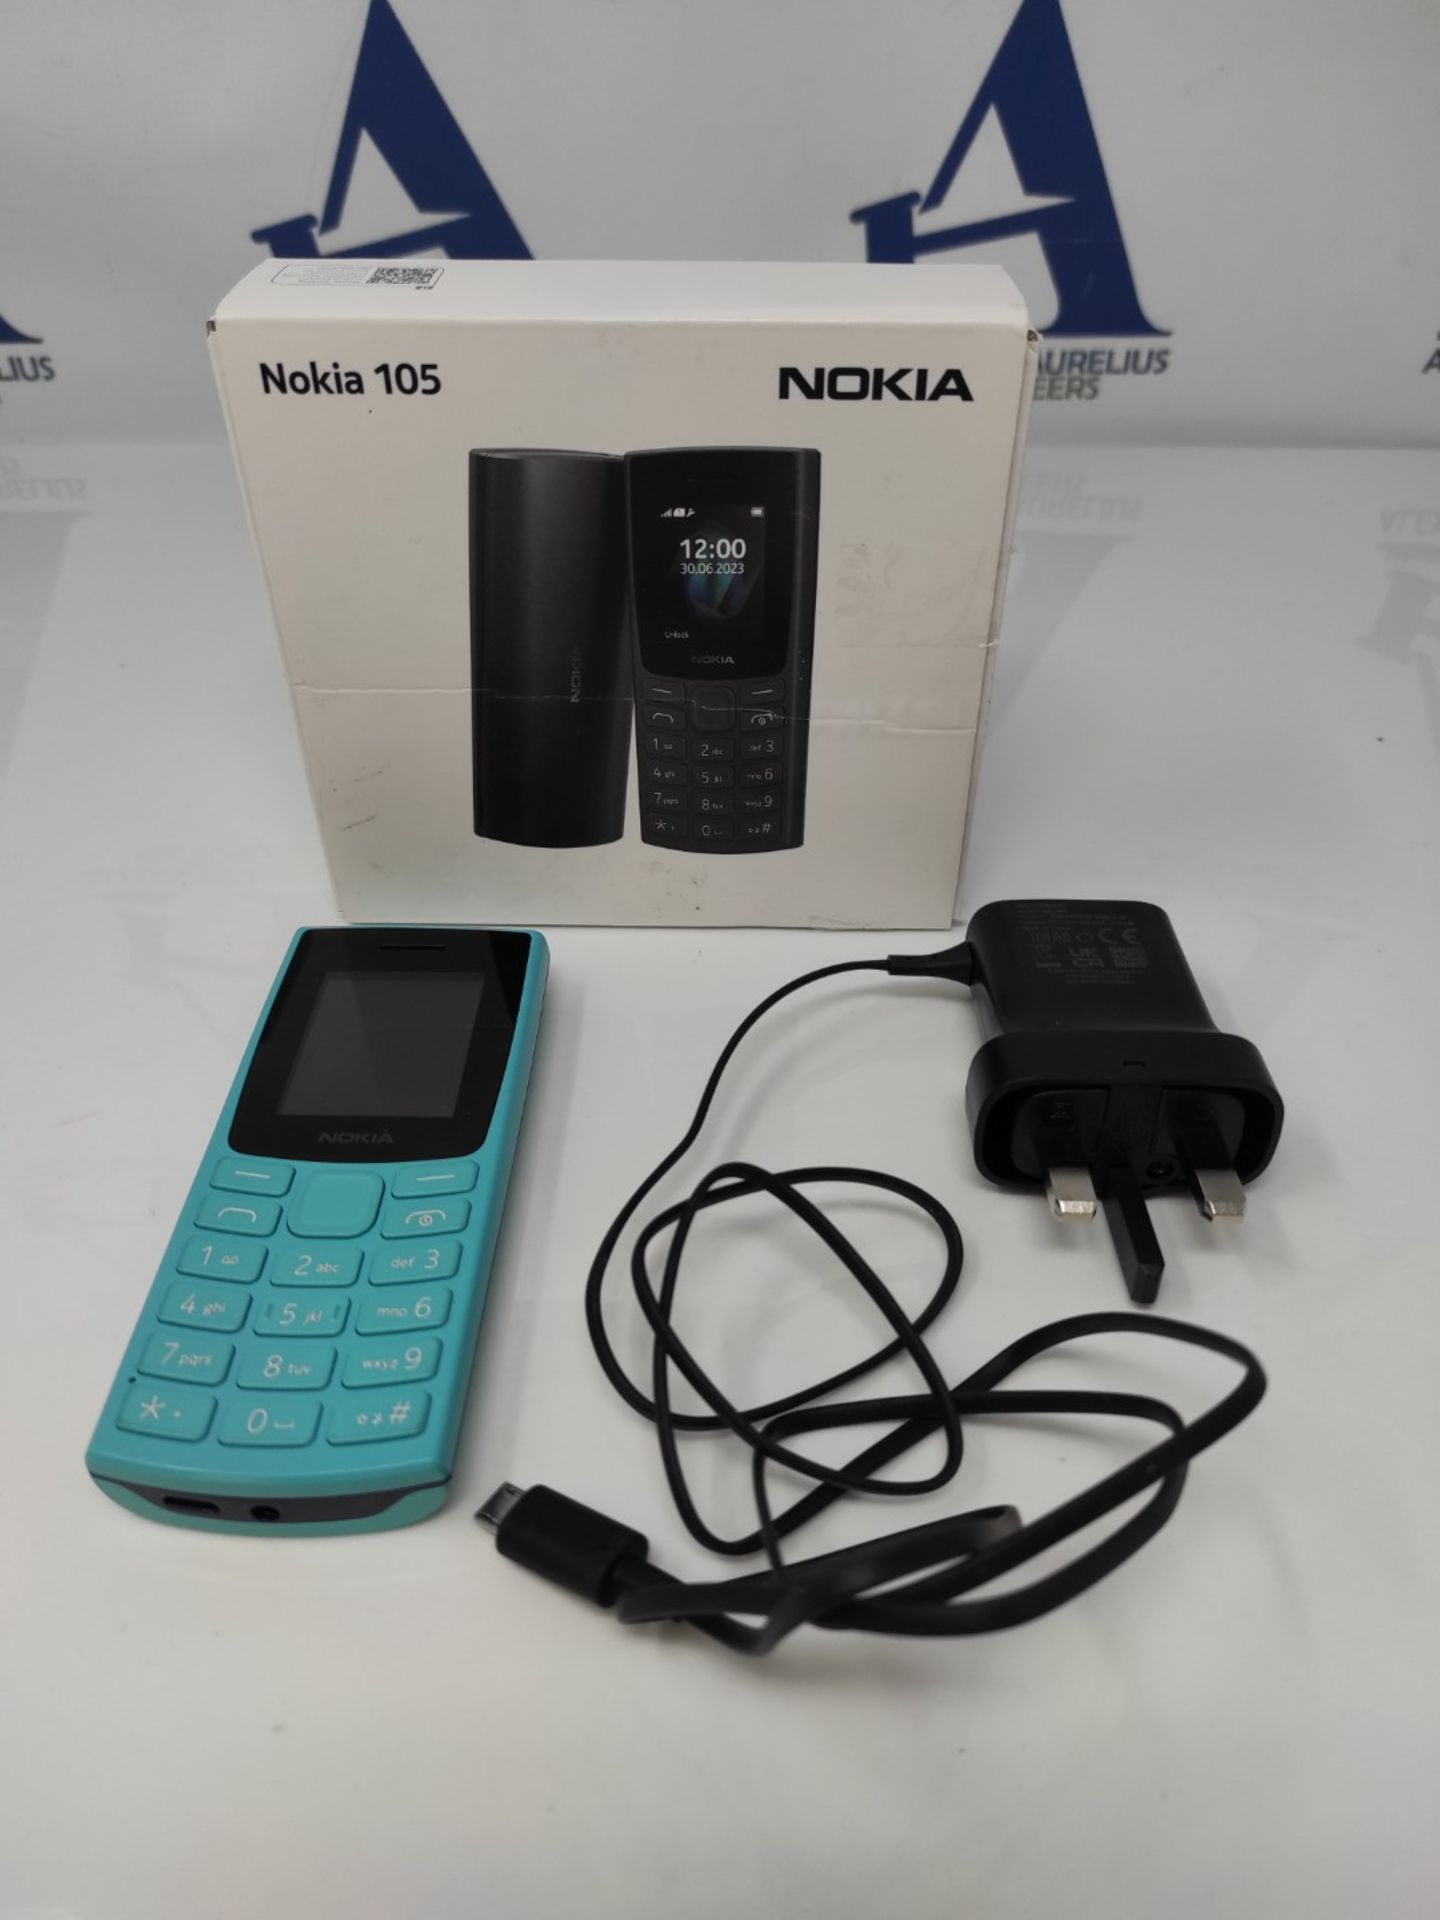 Nokia 105 2G Feature Phone with long-lasting battery, 12 hours of talk-time, wireless - Bild 2 aus 2